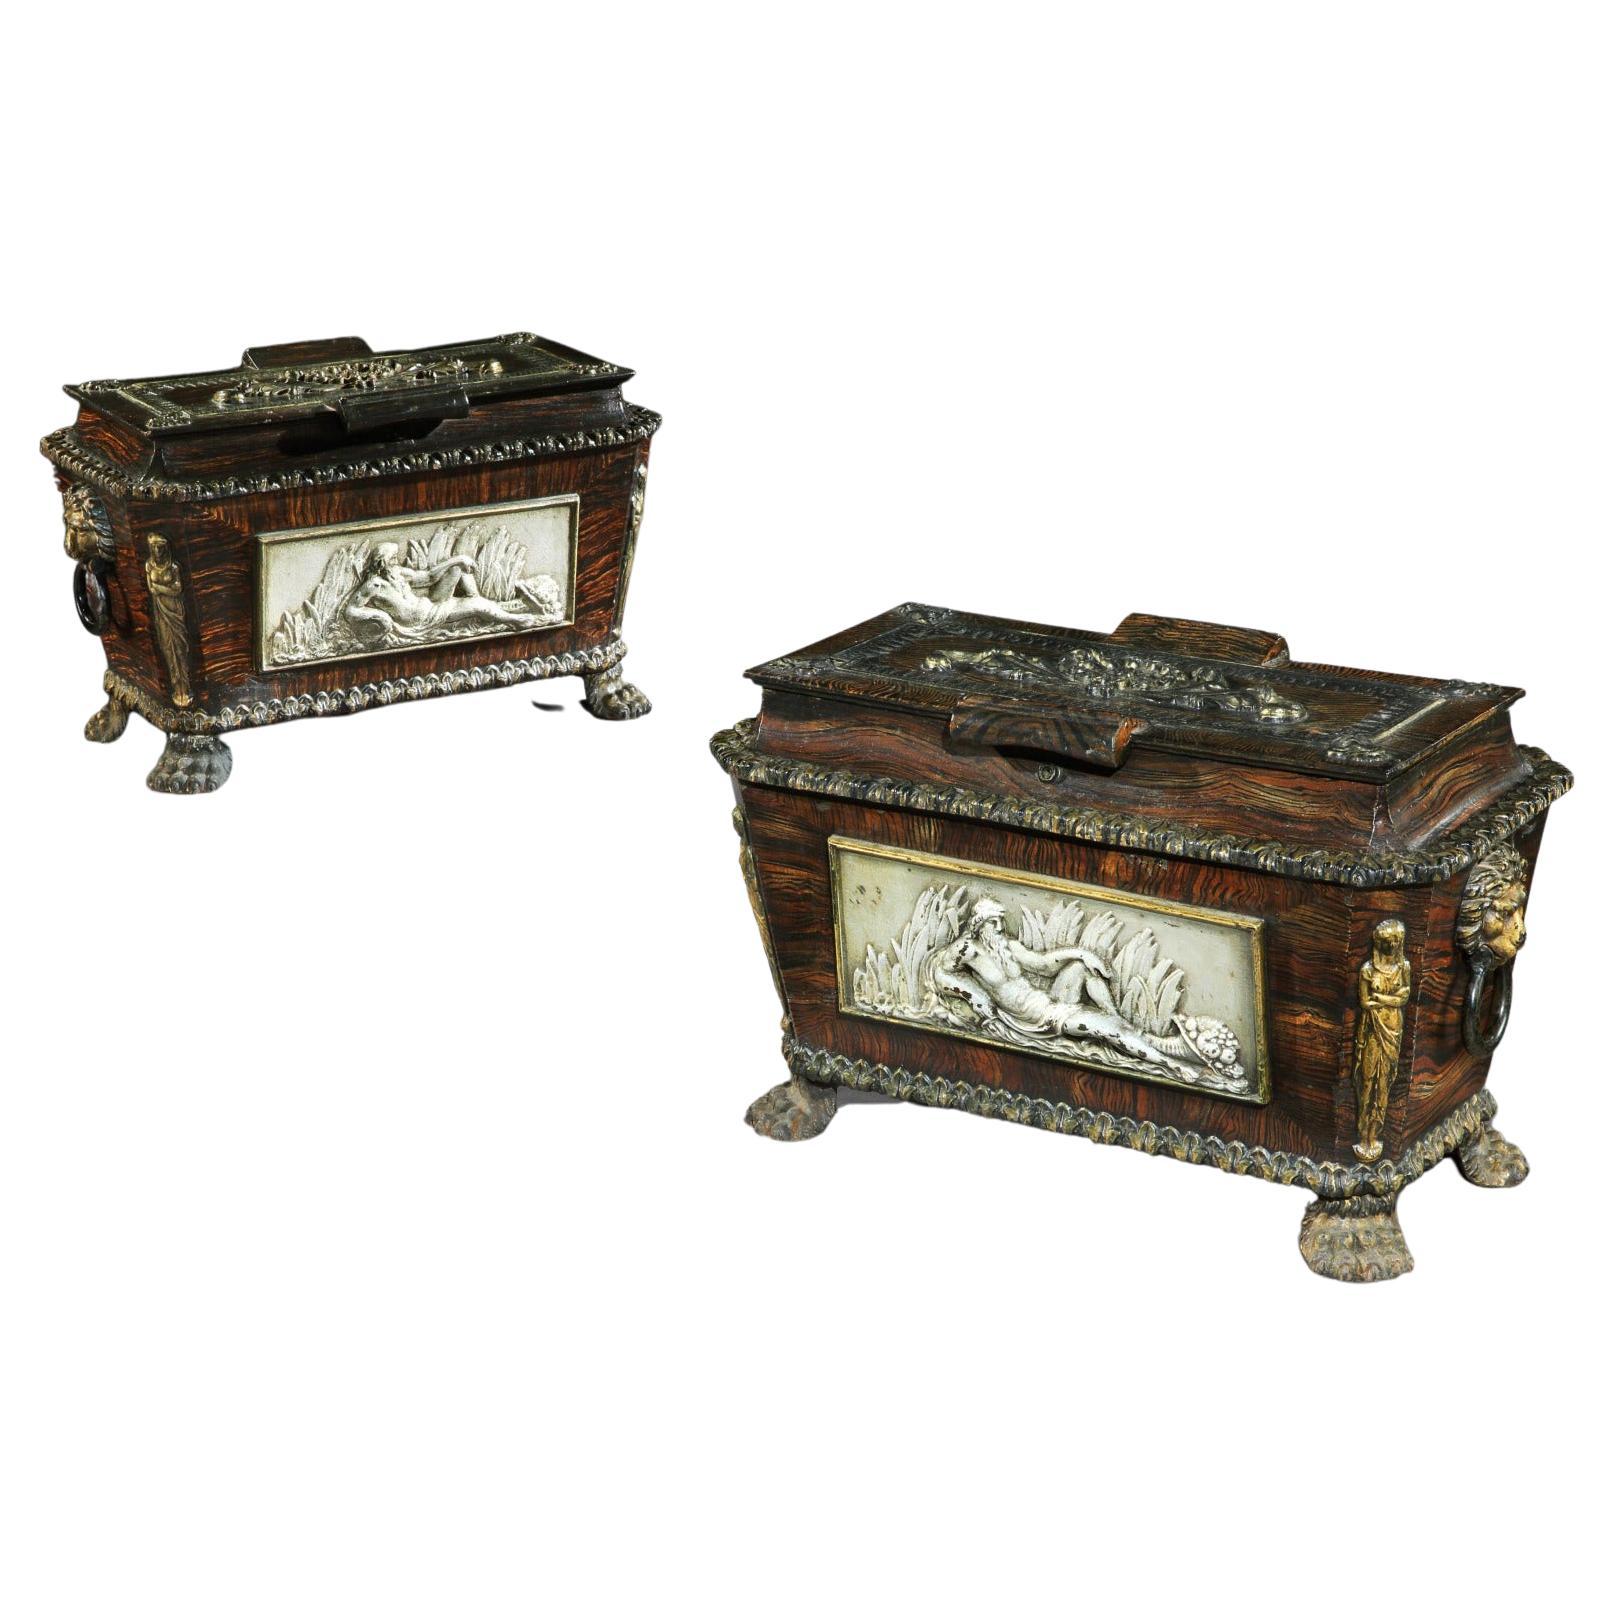 Extremely Rare Pair of Regency Cast-Iron Sarcophagus Shaped Strong Boxes For Sale